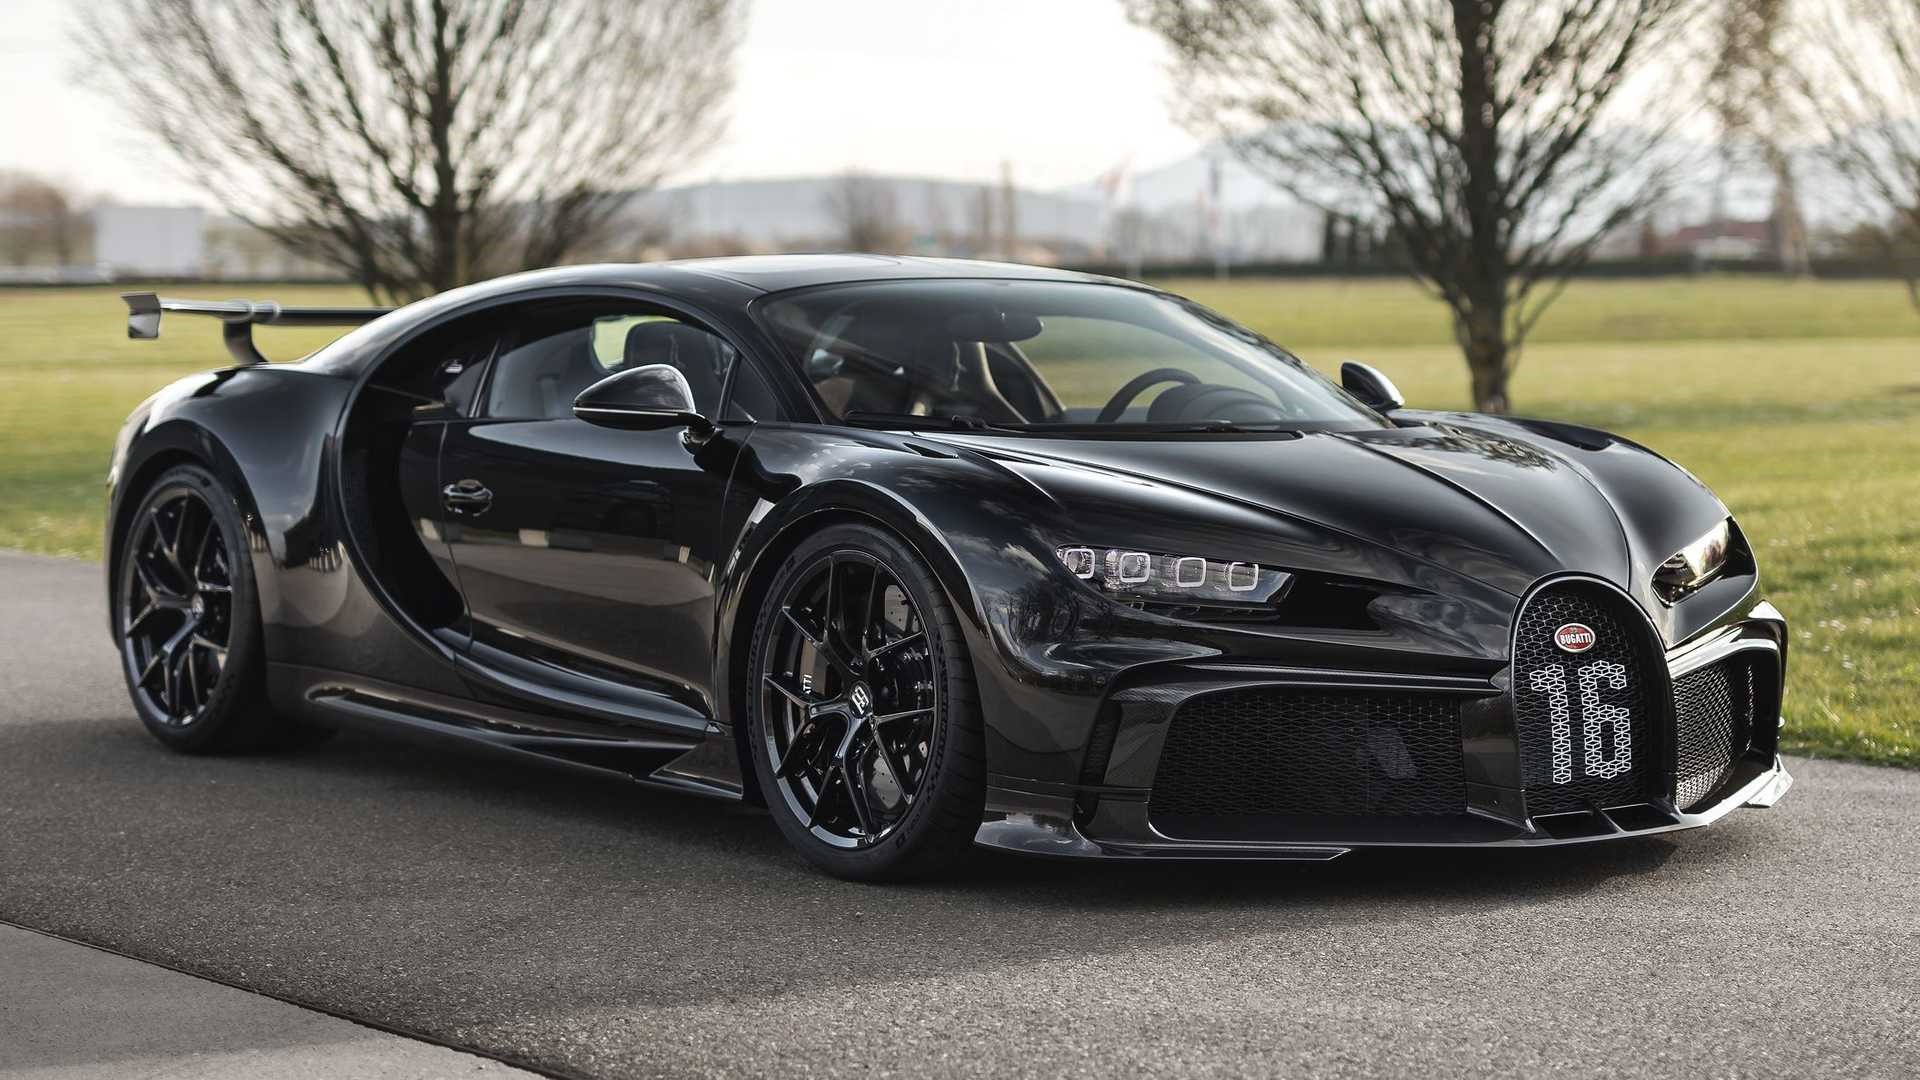 Bugatti celebrates 300 Chiron produced with this black Pur Sport.